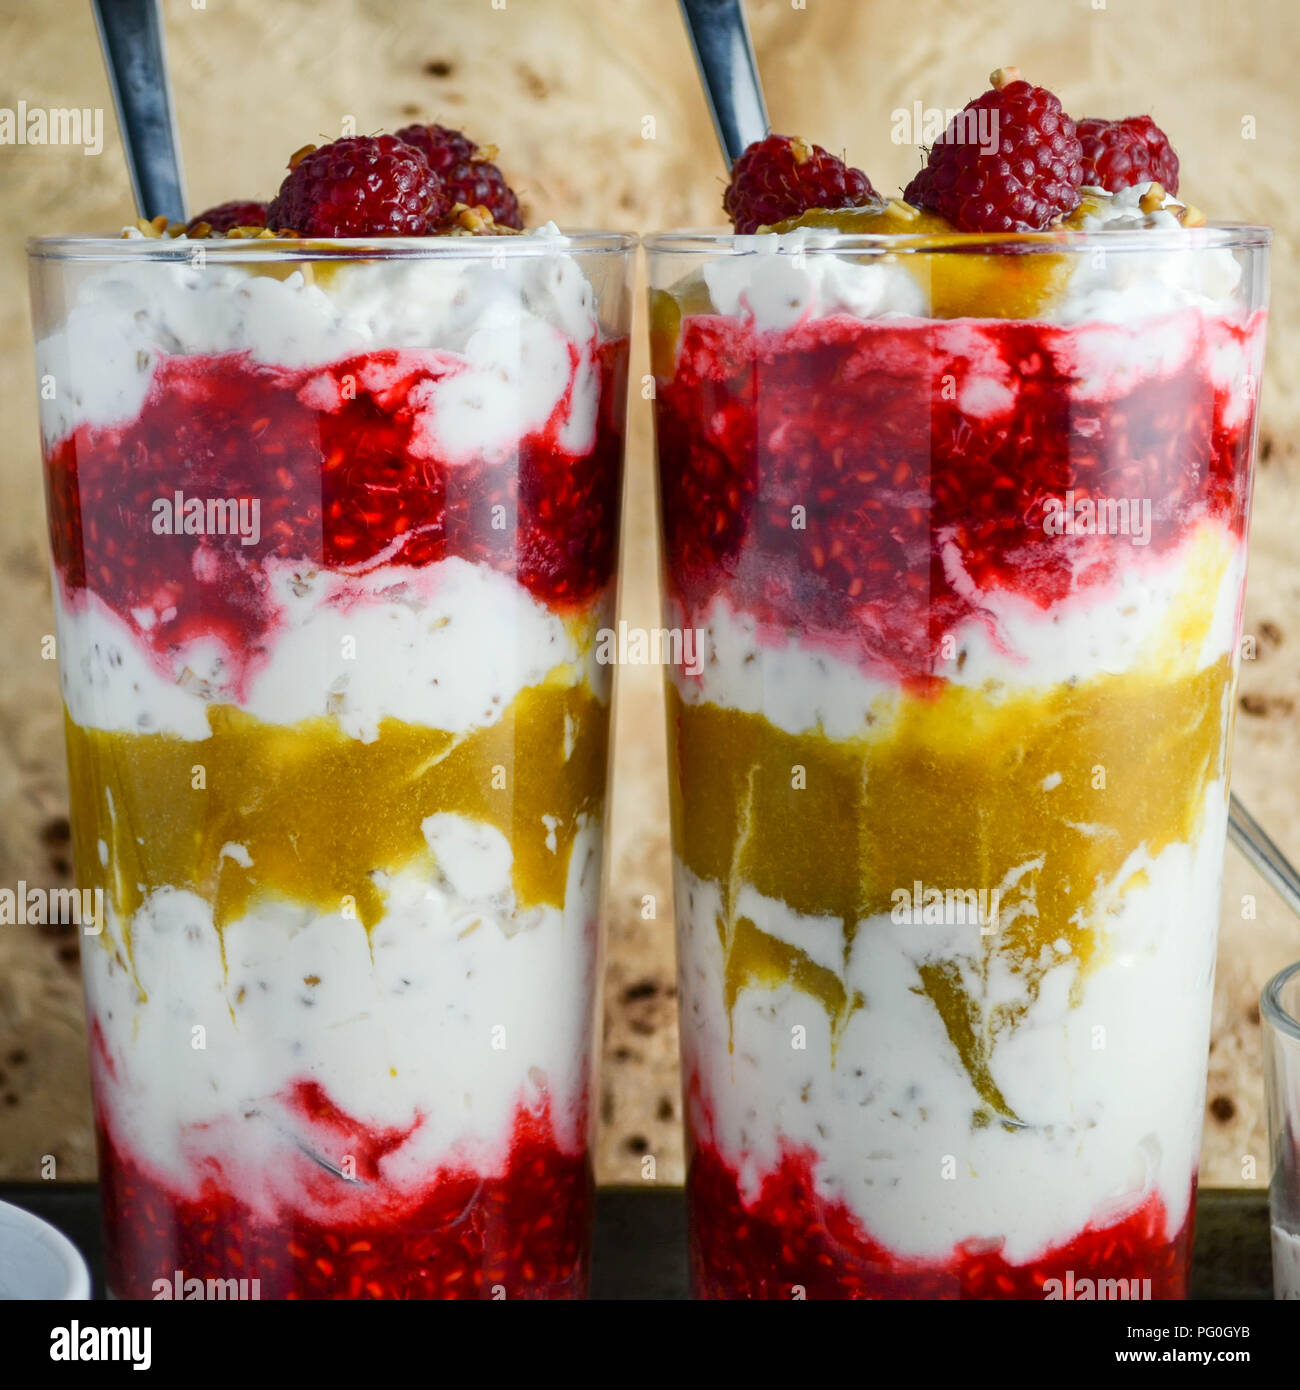 Cranachan - A Scottish dessert made with whipped cream, whisky-soaked toasted oats, pureed raspberries and (in this case) greengages. Stock Photo